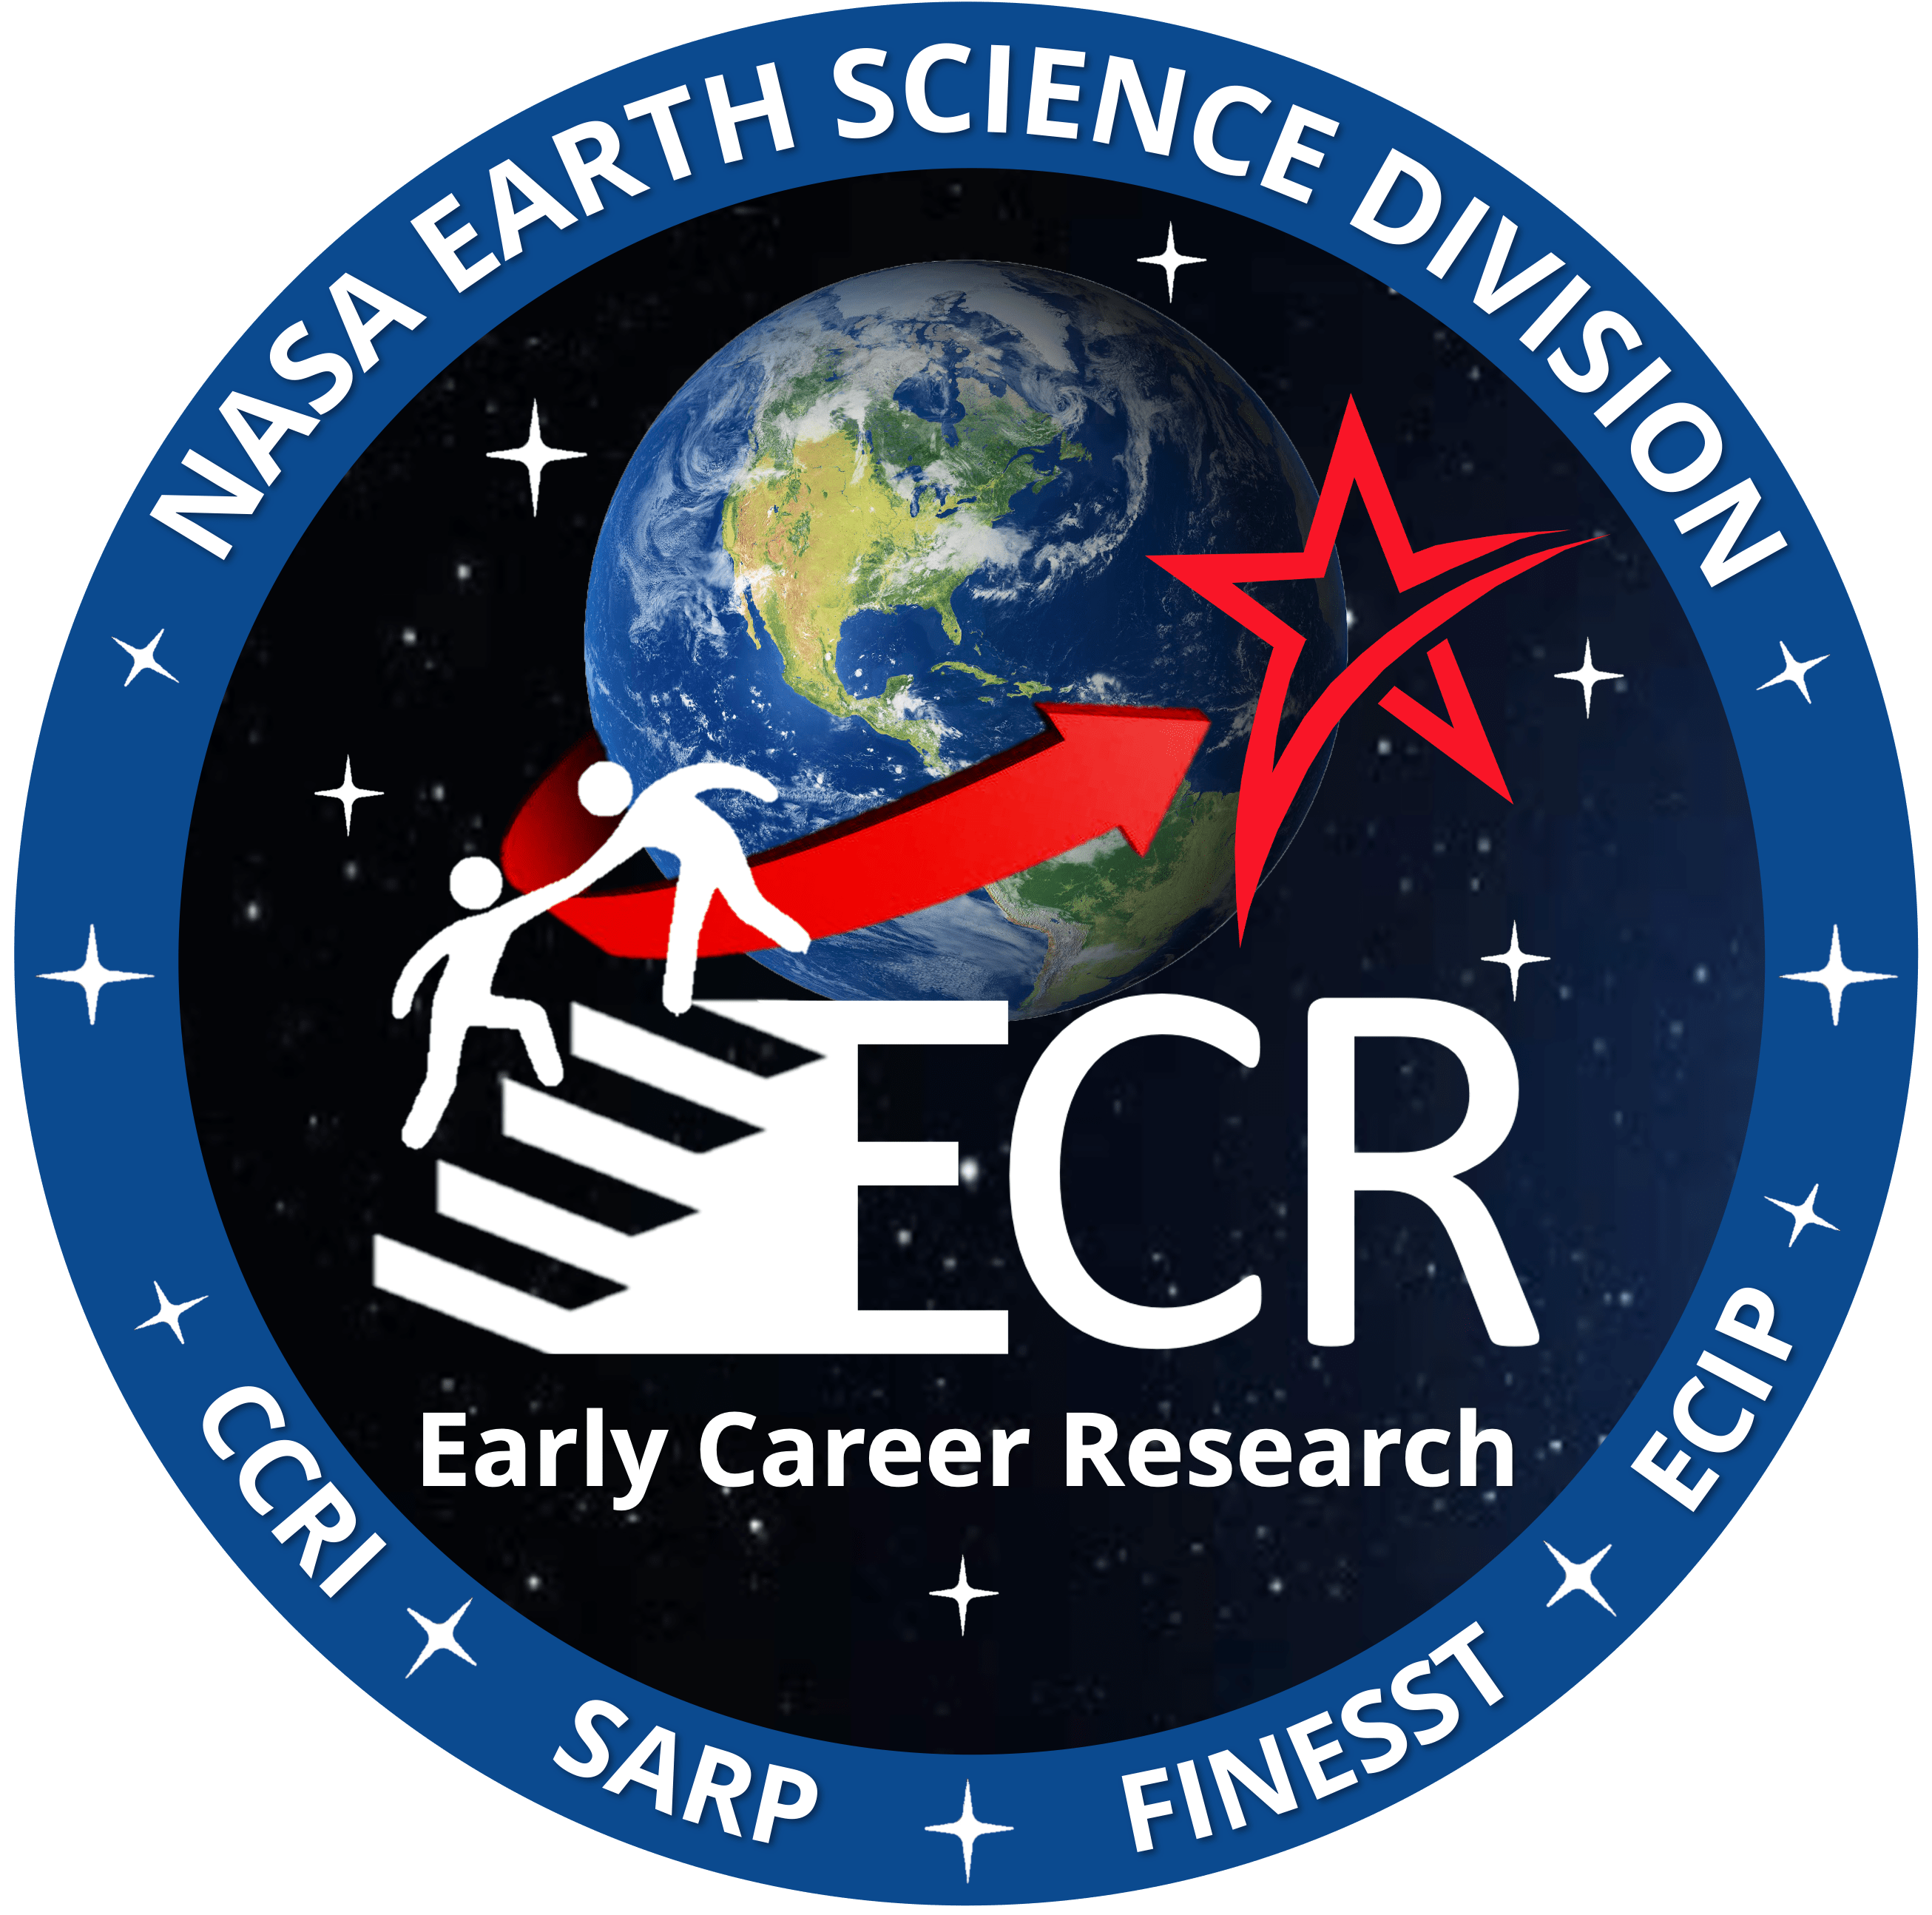 NASA's Earth Science Division Early Career Research program graphic contains a picture of the Northern Hemisphere of Earth with a background of stars. A red arrow flows around the Earth ending in an excellence star. The E in ECR contains stairs with a mentor helping a mentee up. The program consists of 4 projects that are labeled on the outer rim of the graphic.